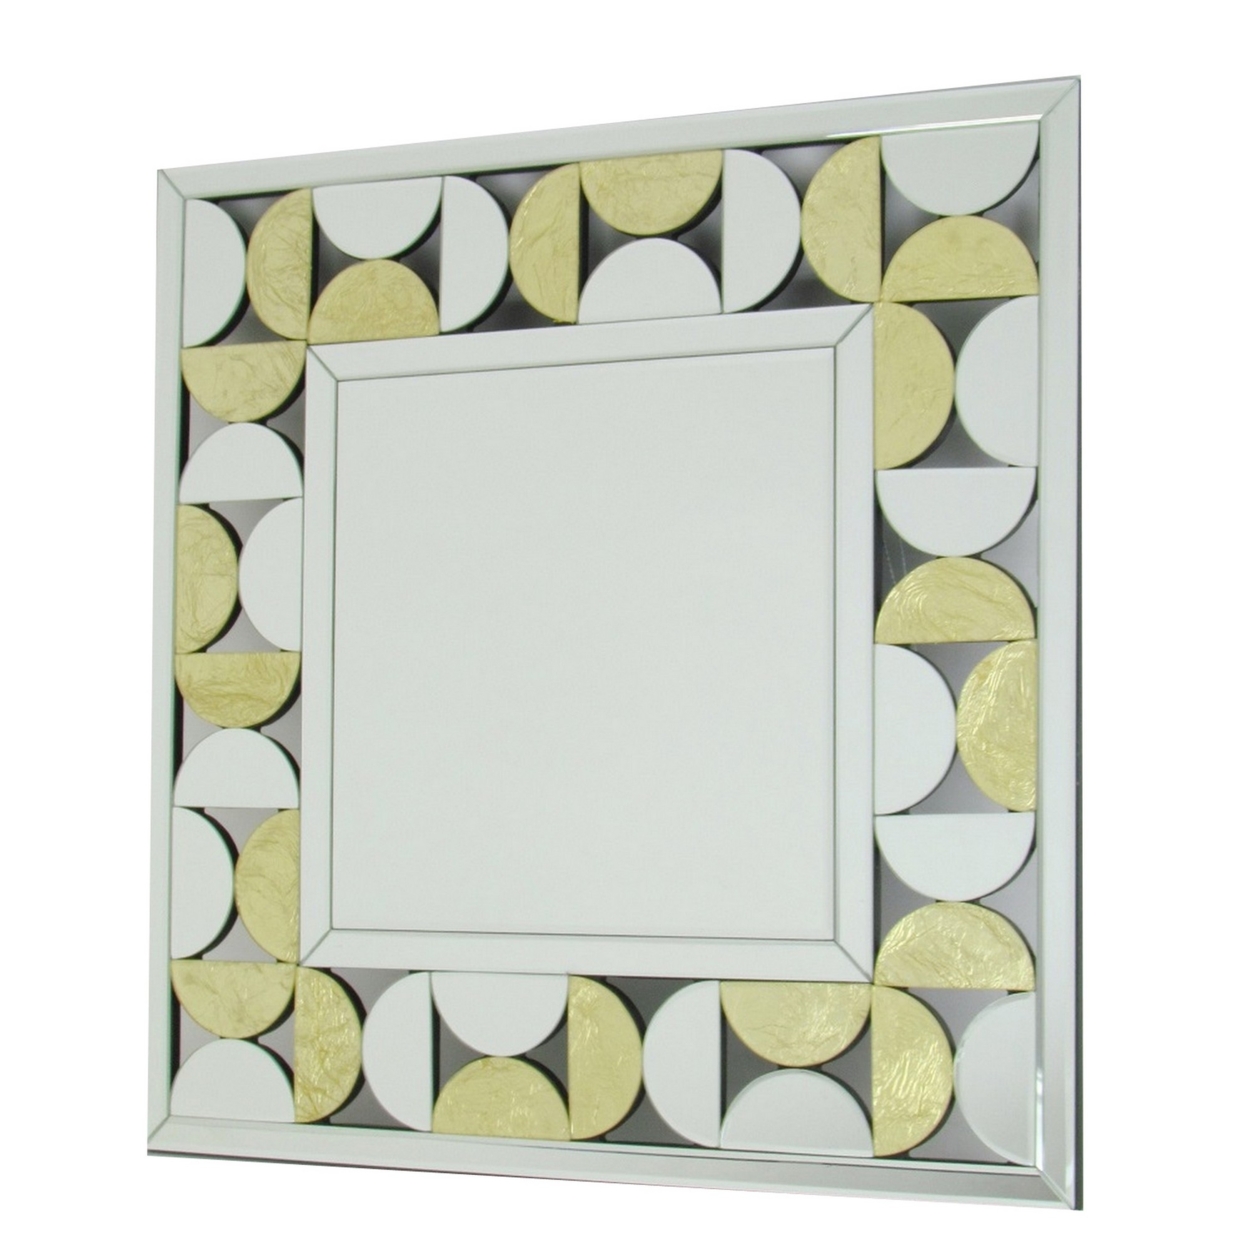 Square Mirror With Golden Leaf Accent And Beveled Edge, Silver- Saltoro Sherpi